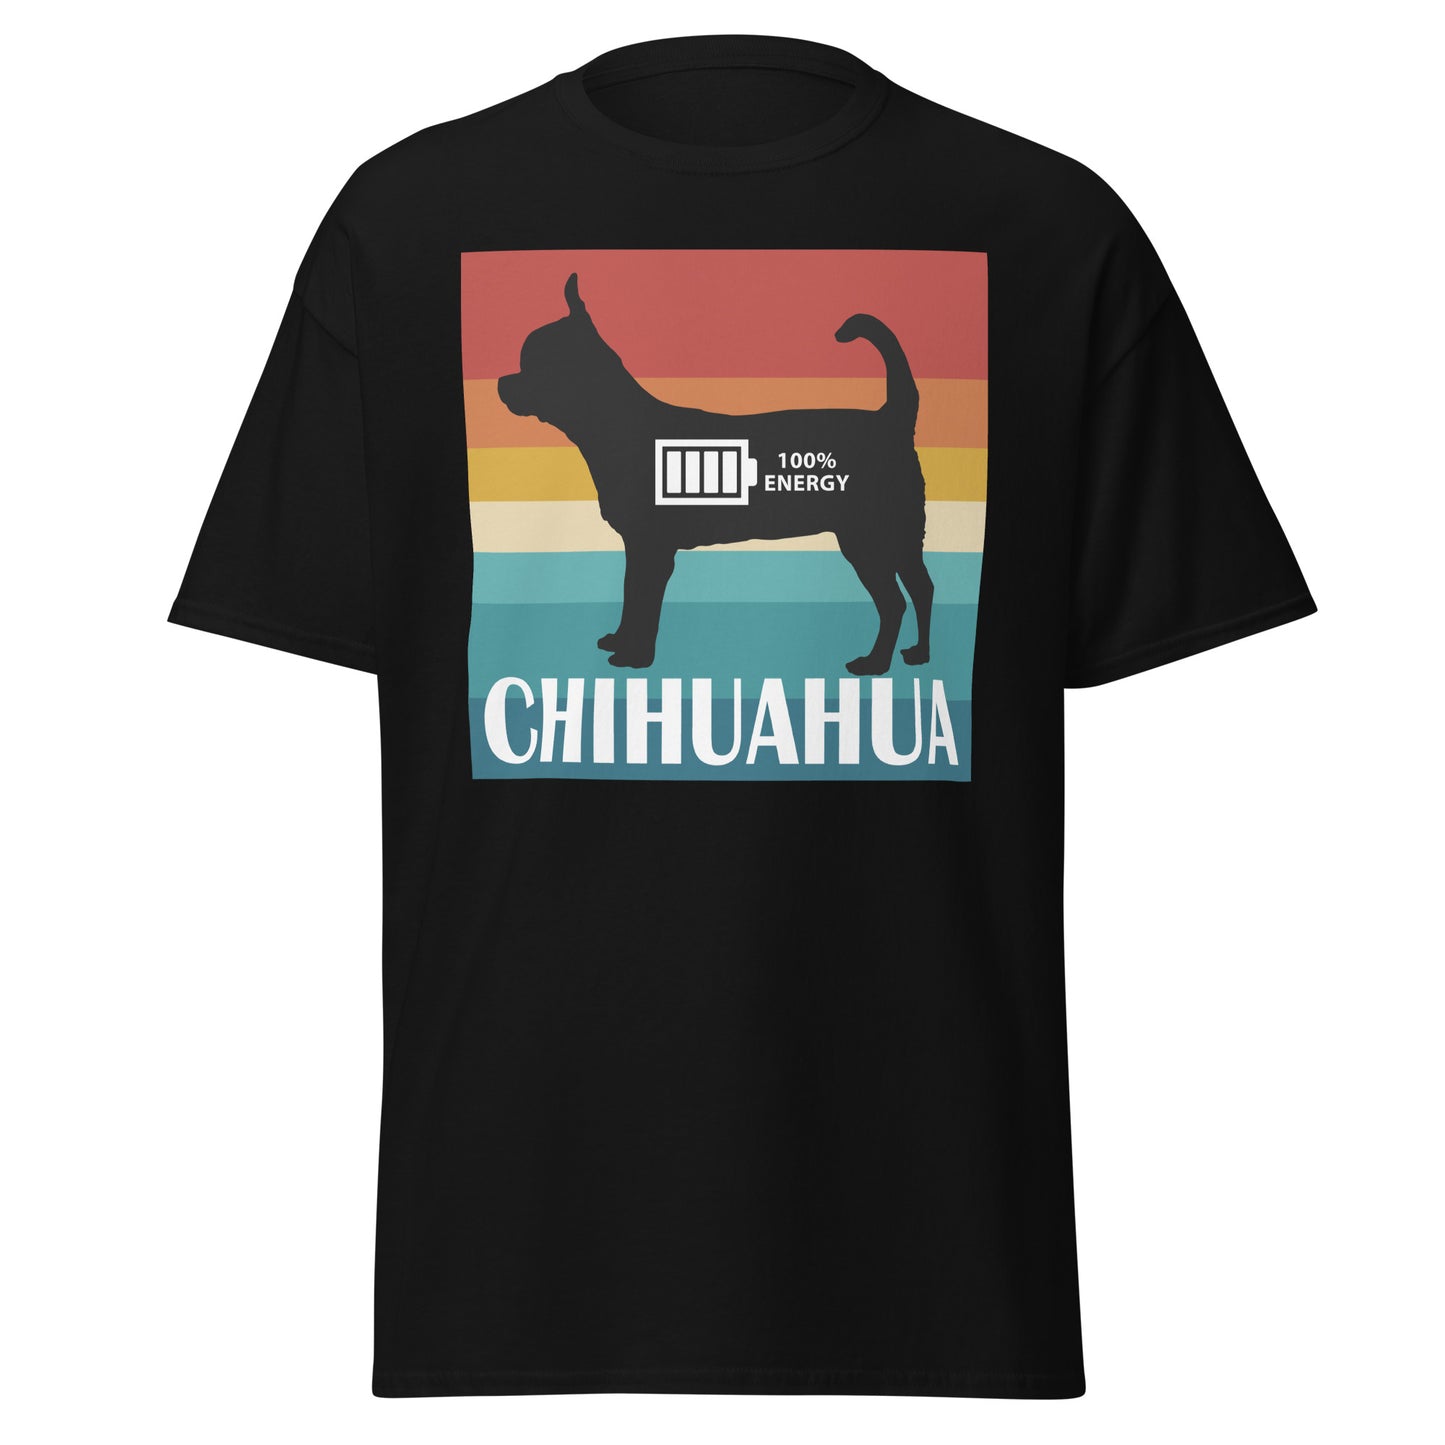 Chihuahua 100% Energy Men's classic tee by Dog Artistry